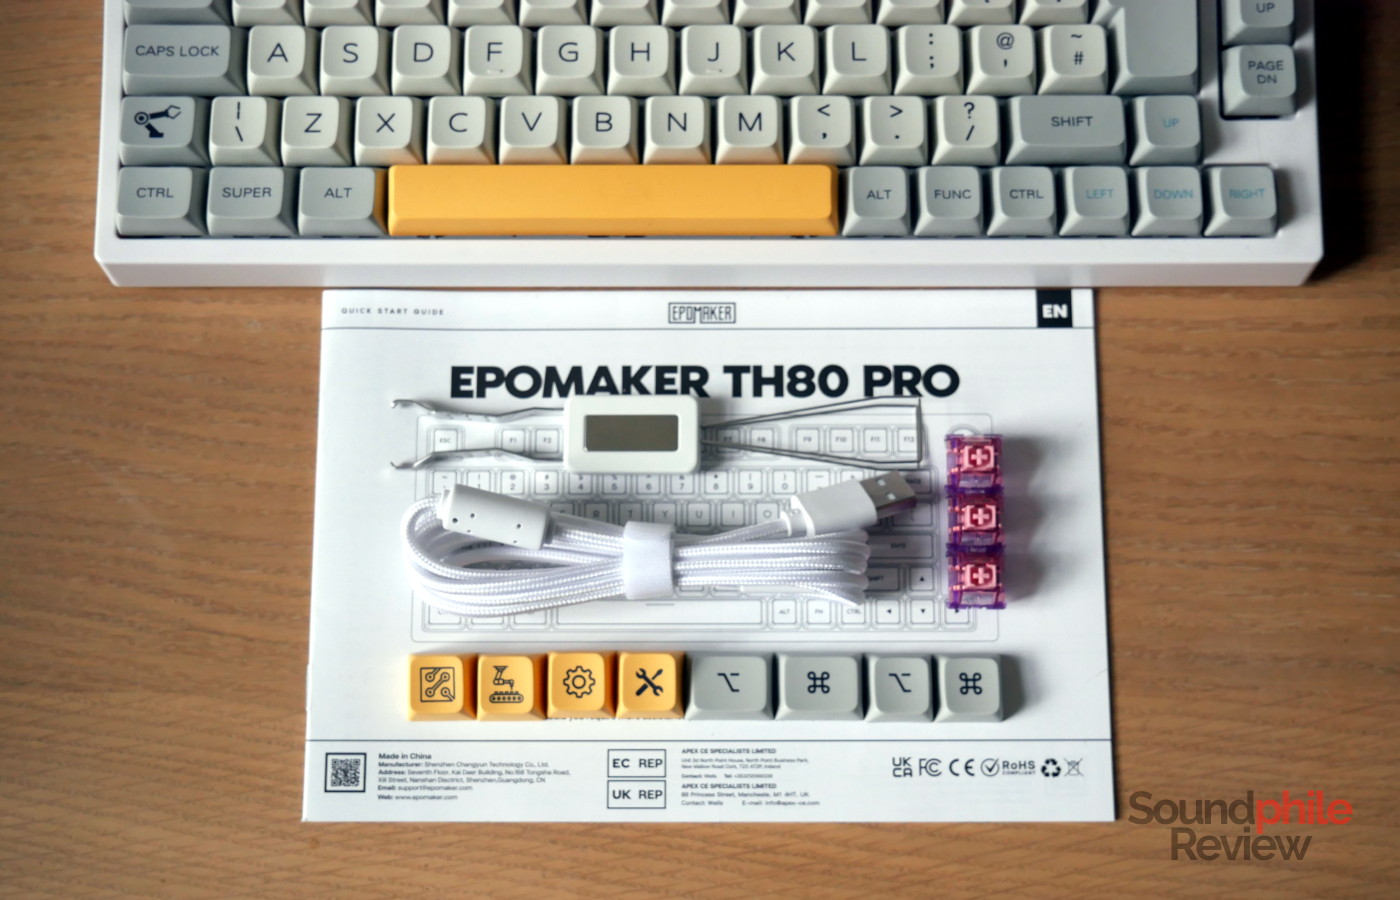 The Epomaker TH80 Pro comes with Mac keycaps, a keycap and switch puller and three spare switches